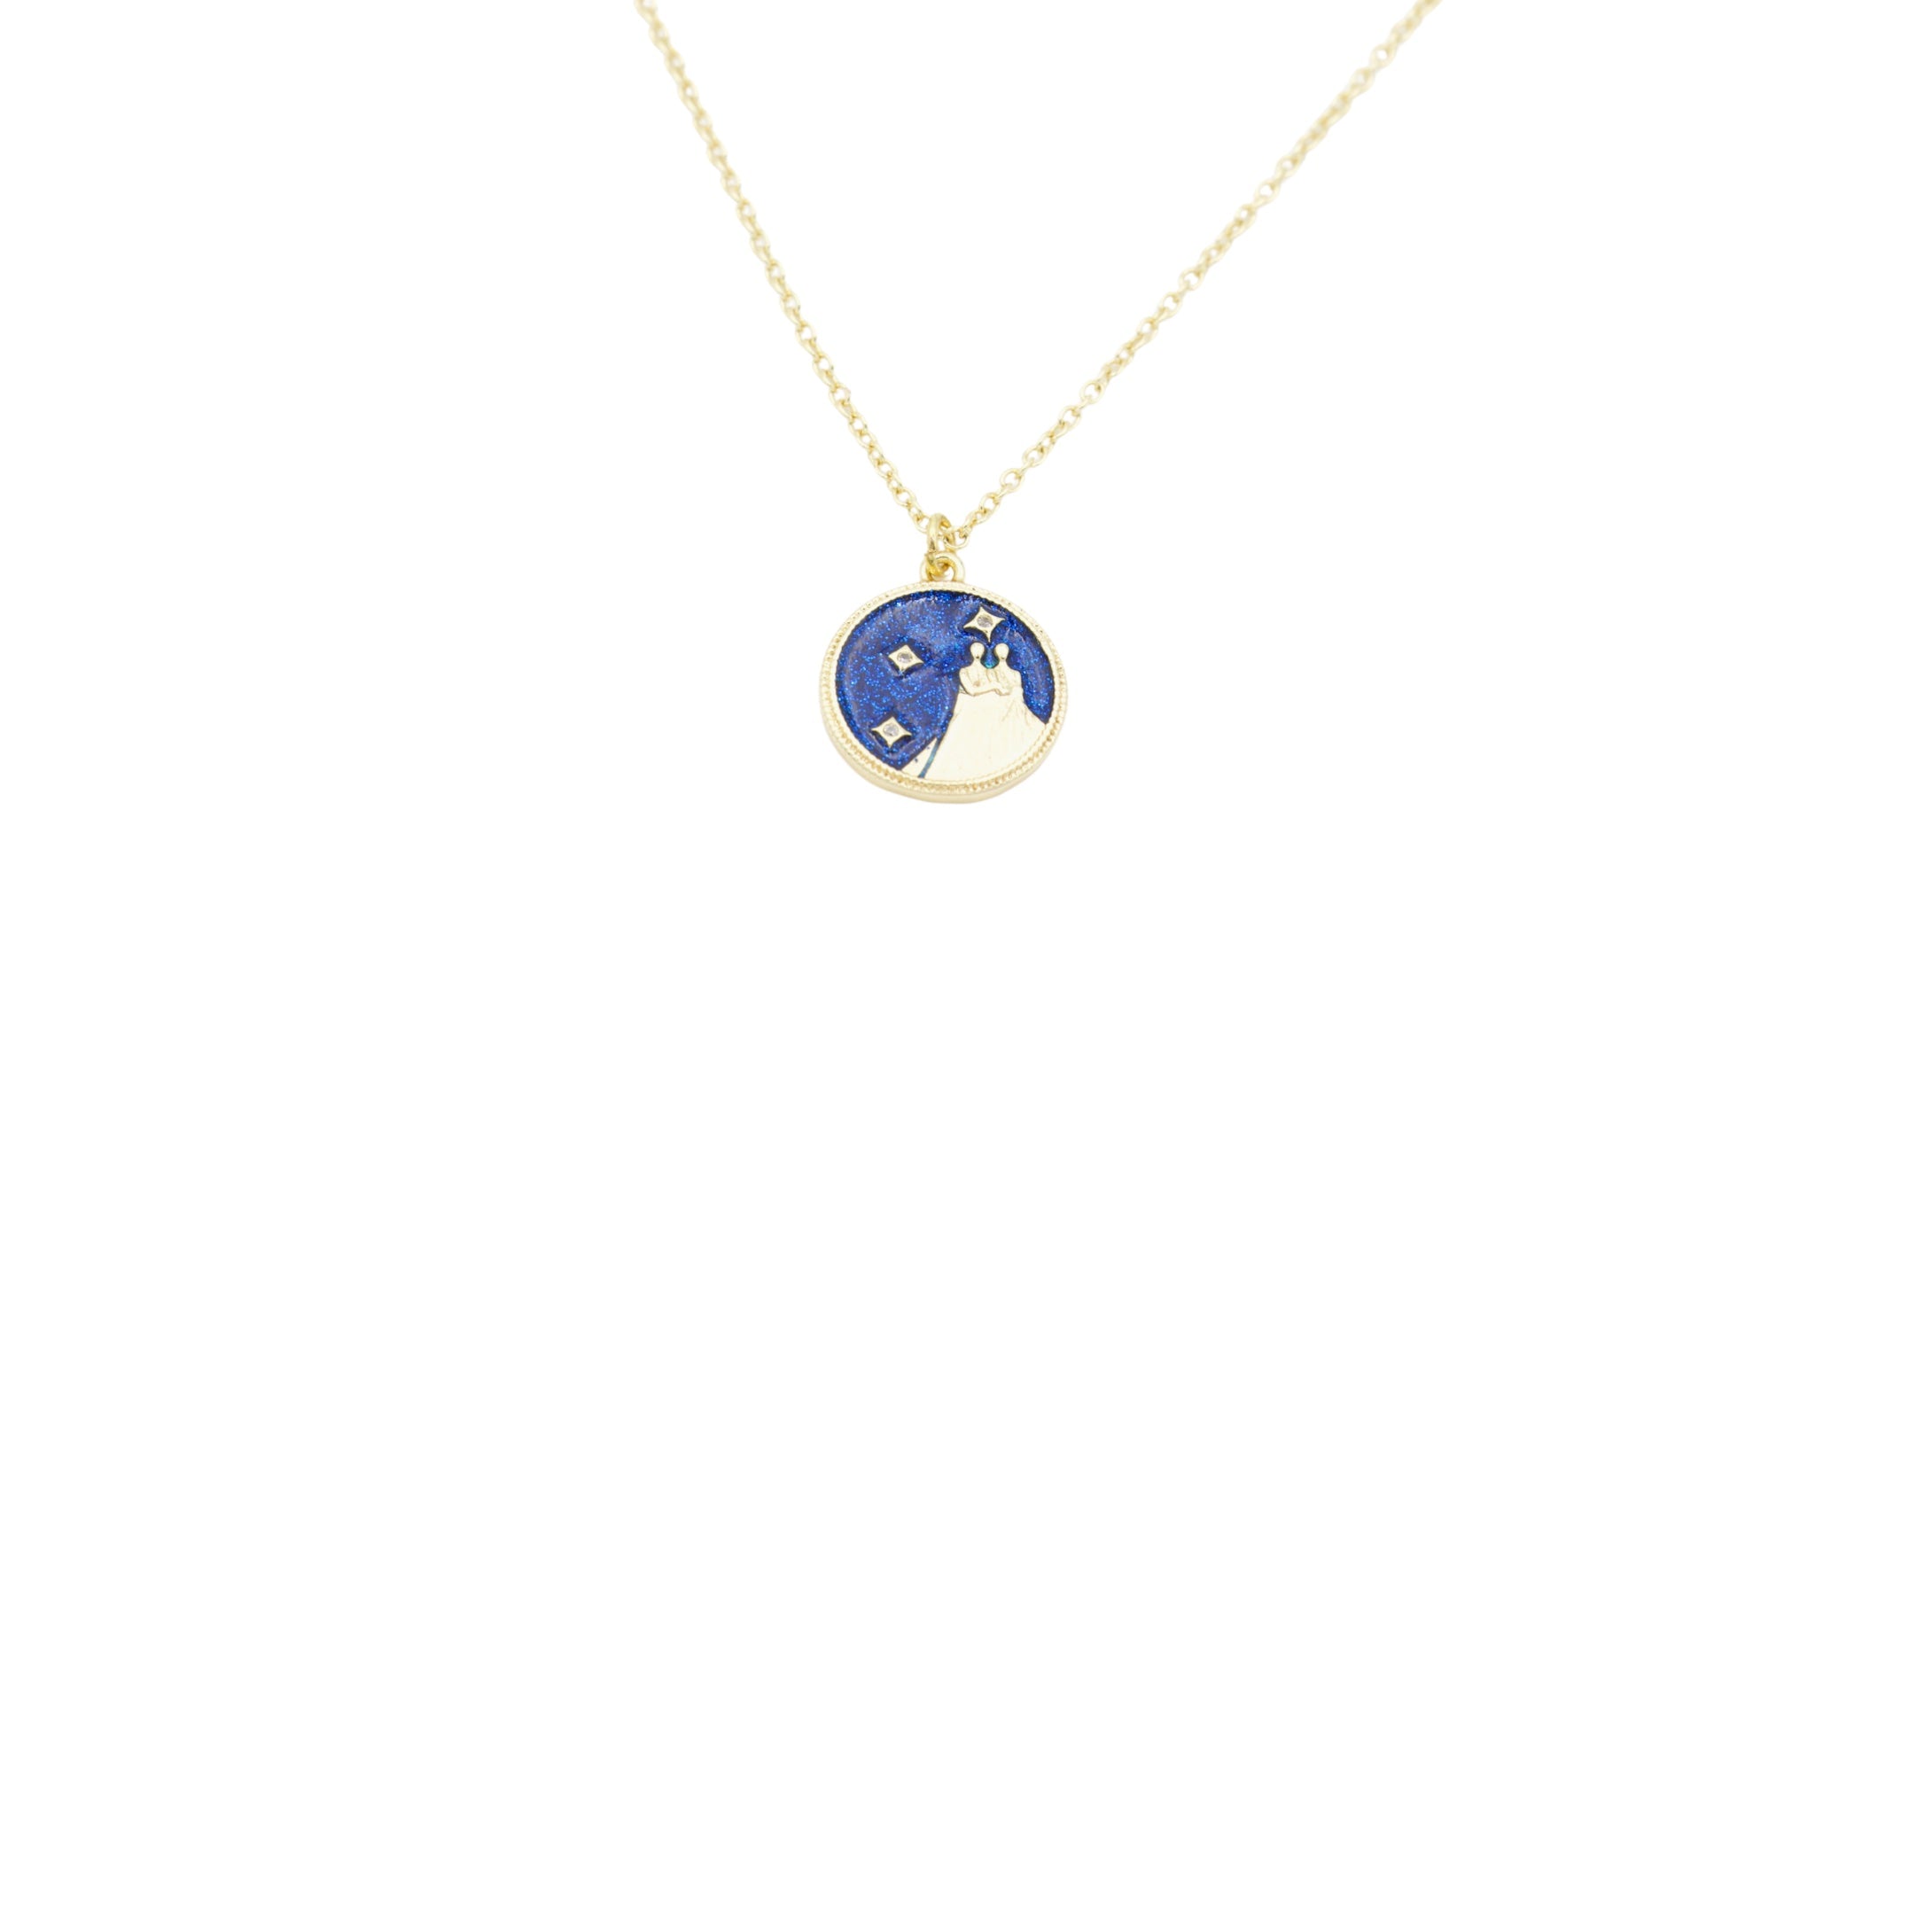 AW Boutique's Zodiac Astro Coin is a dainty pendant full of sparkle and shine.  This piece adds a pop of colour to your everyday wear and at 18 inches is a great length to mix and layer your other chains with.  Proudly wear either your own star sign or the star sign of a loved one close to your heart.  Zodiac shown is Gemini.